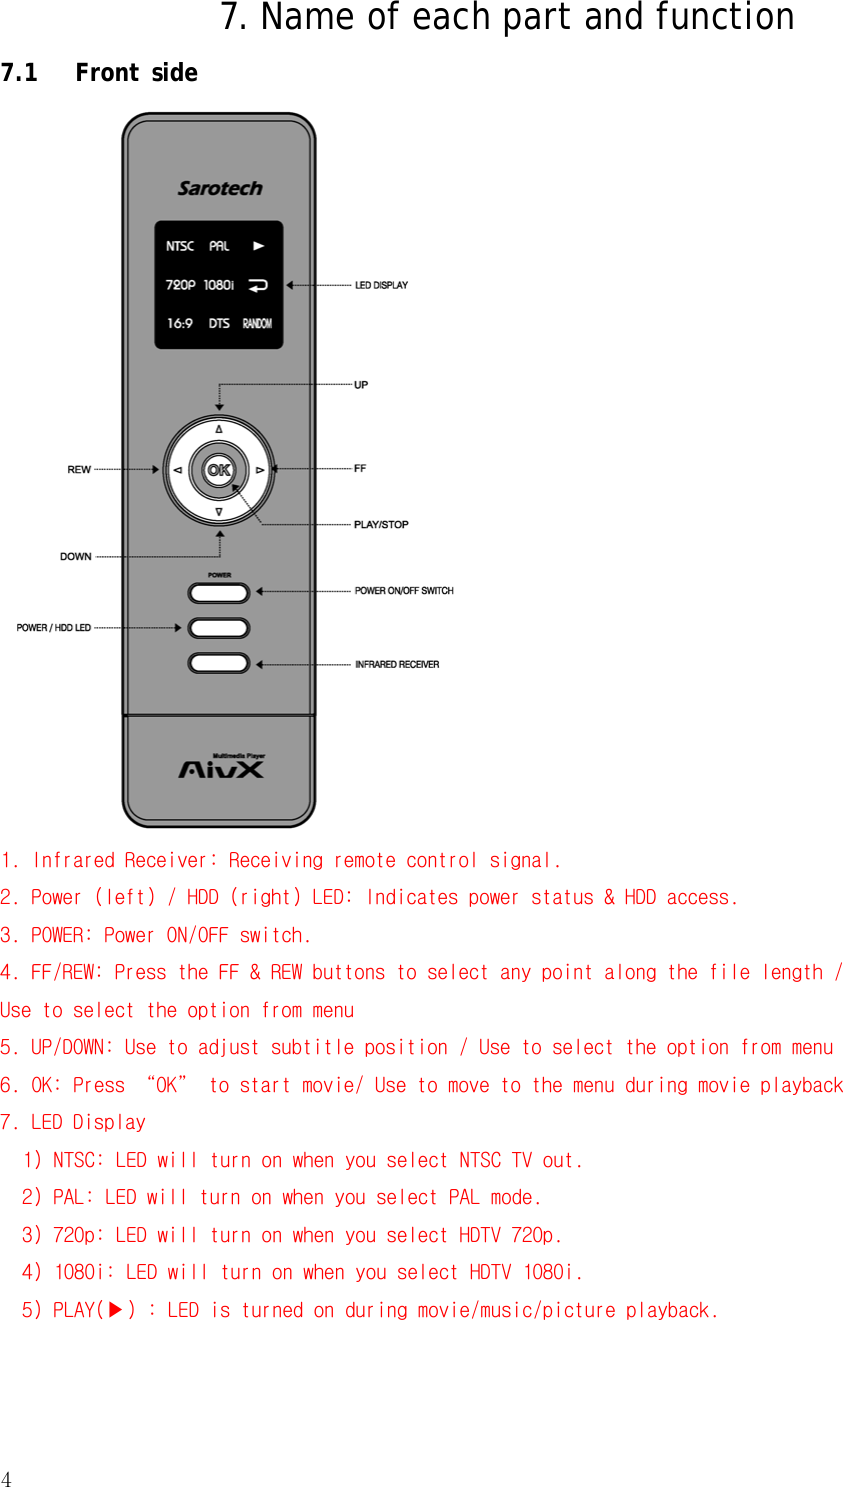 4  7. Name of each part and function 7.1 Front side  1. Infrared Receiver: Receiving remote control signal. 2. Power (left) / HDD (right) LED: Indicates power status &amp; HDD access. 3. POWER: Power ON/OFF switch.  4. FF/REW: Press the FF &amp; REW buttons to select any point along the file length / Use to select the option from menu 5. UP/DOWN: Use to adjust subtitle position / Use to select the option from menu 6. OK: Press “OK” to start movie/ Use to move to the menu during movie playback 7. LED Display 1) NTSC: LED will turn on when you select NTSC TV out. 2) PAL: LED will turn on when you select PAL mode.  3) 720p: LED will turn on when you select HDTV 720p.   4) 1080i: LED will turn on when you select HDTV 1080i.  5) PLAY(▶) : LED is turned on during movie/music/picture playback.  